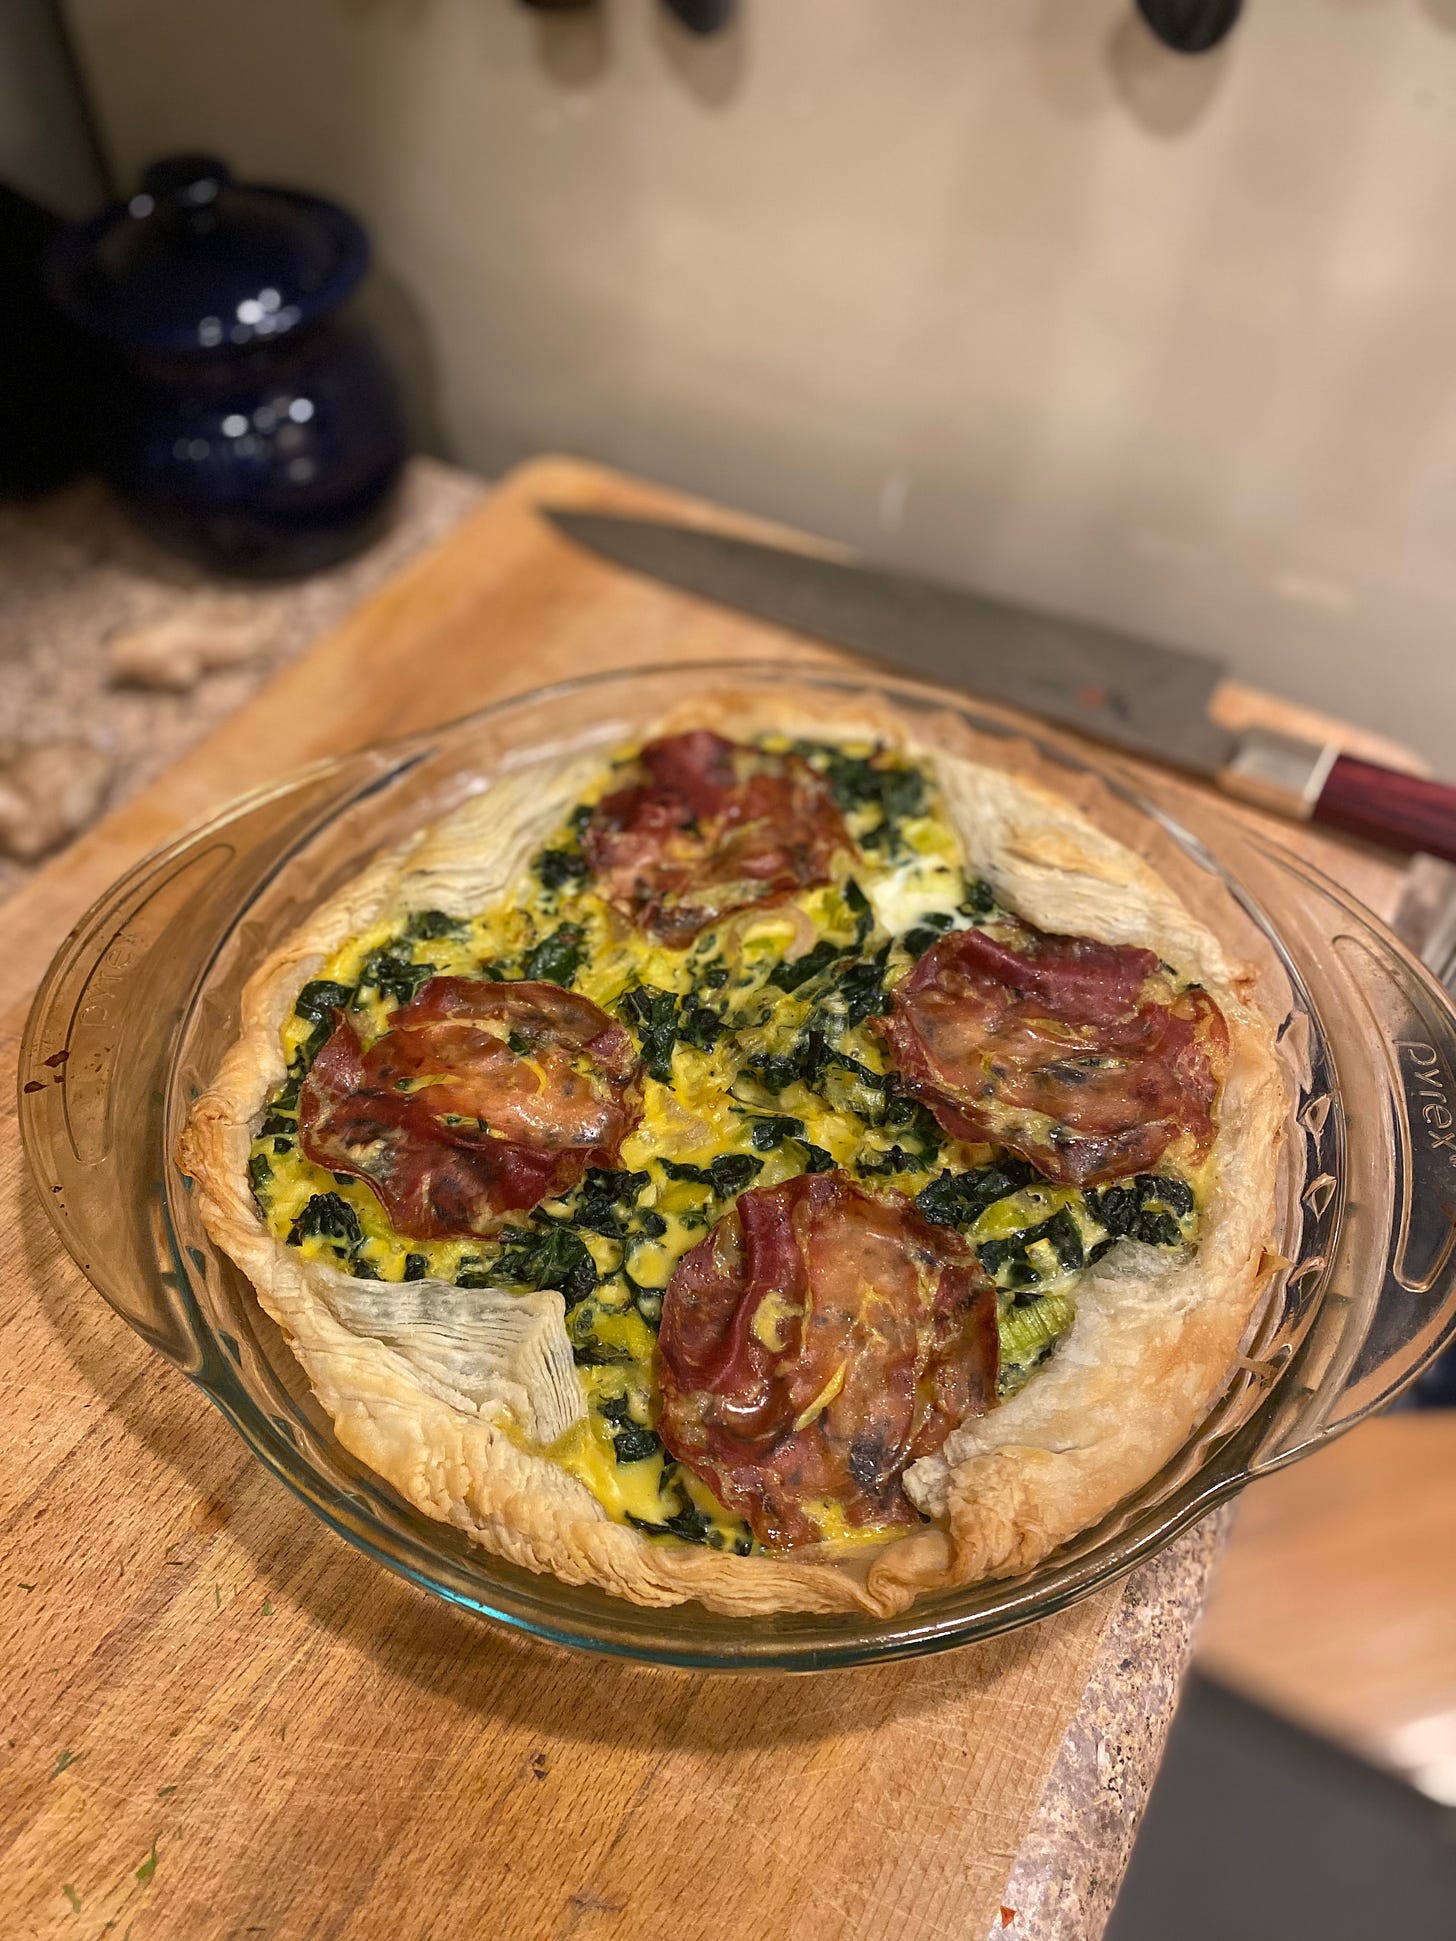 A puff pastry quiche with leeks and dark green kale throughout. On top are four lightly crisped slices of prosciutto-salami. It's in a glass pie pan resting on a cutting board next to a knife.